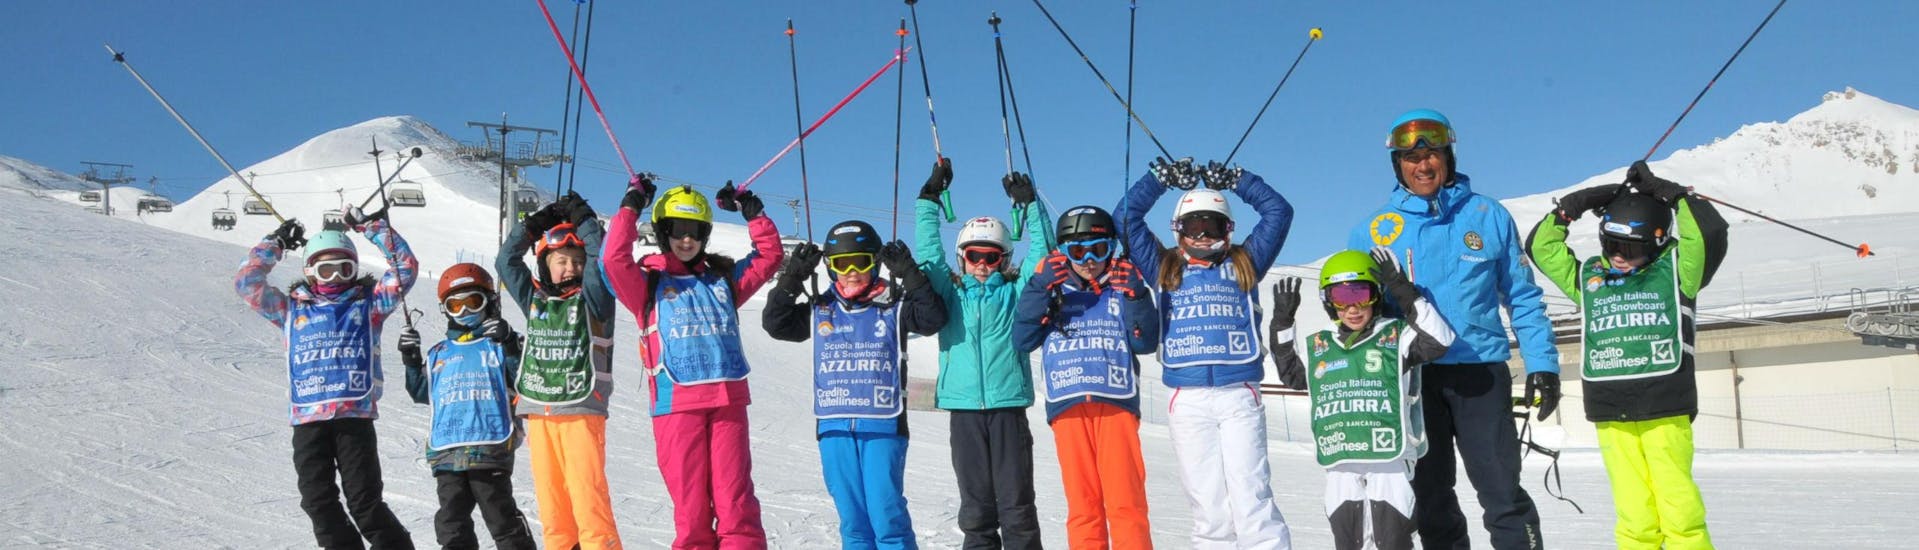 A group of children is enjoying their Kids Ski Lessons (4-14 y.) - Full Day with the ski school Scuola di Sci Azzurra Livigno on the ski slopes of Livigno.